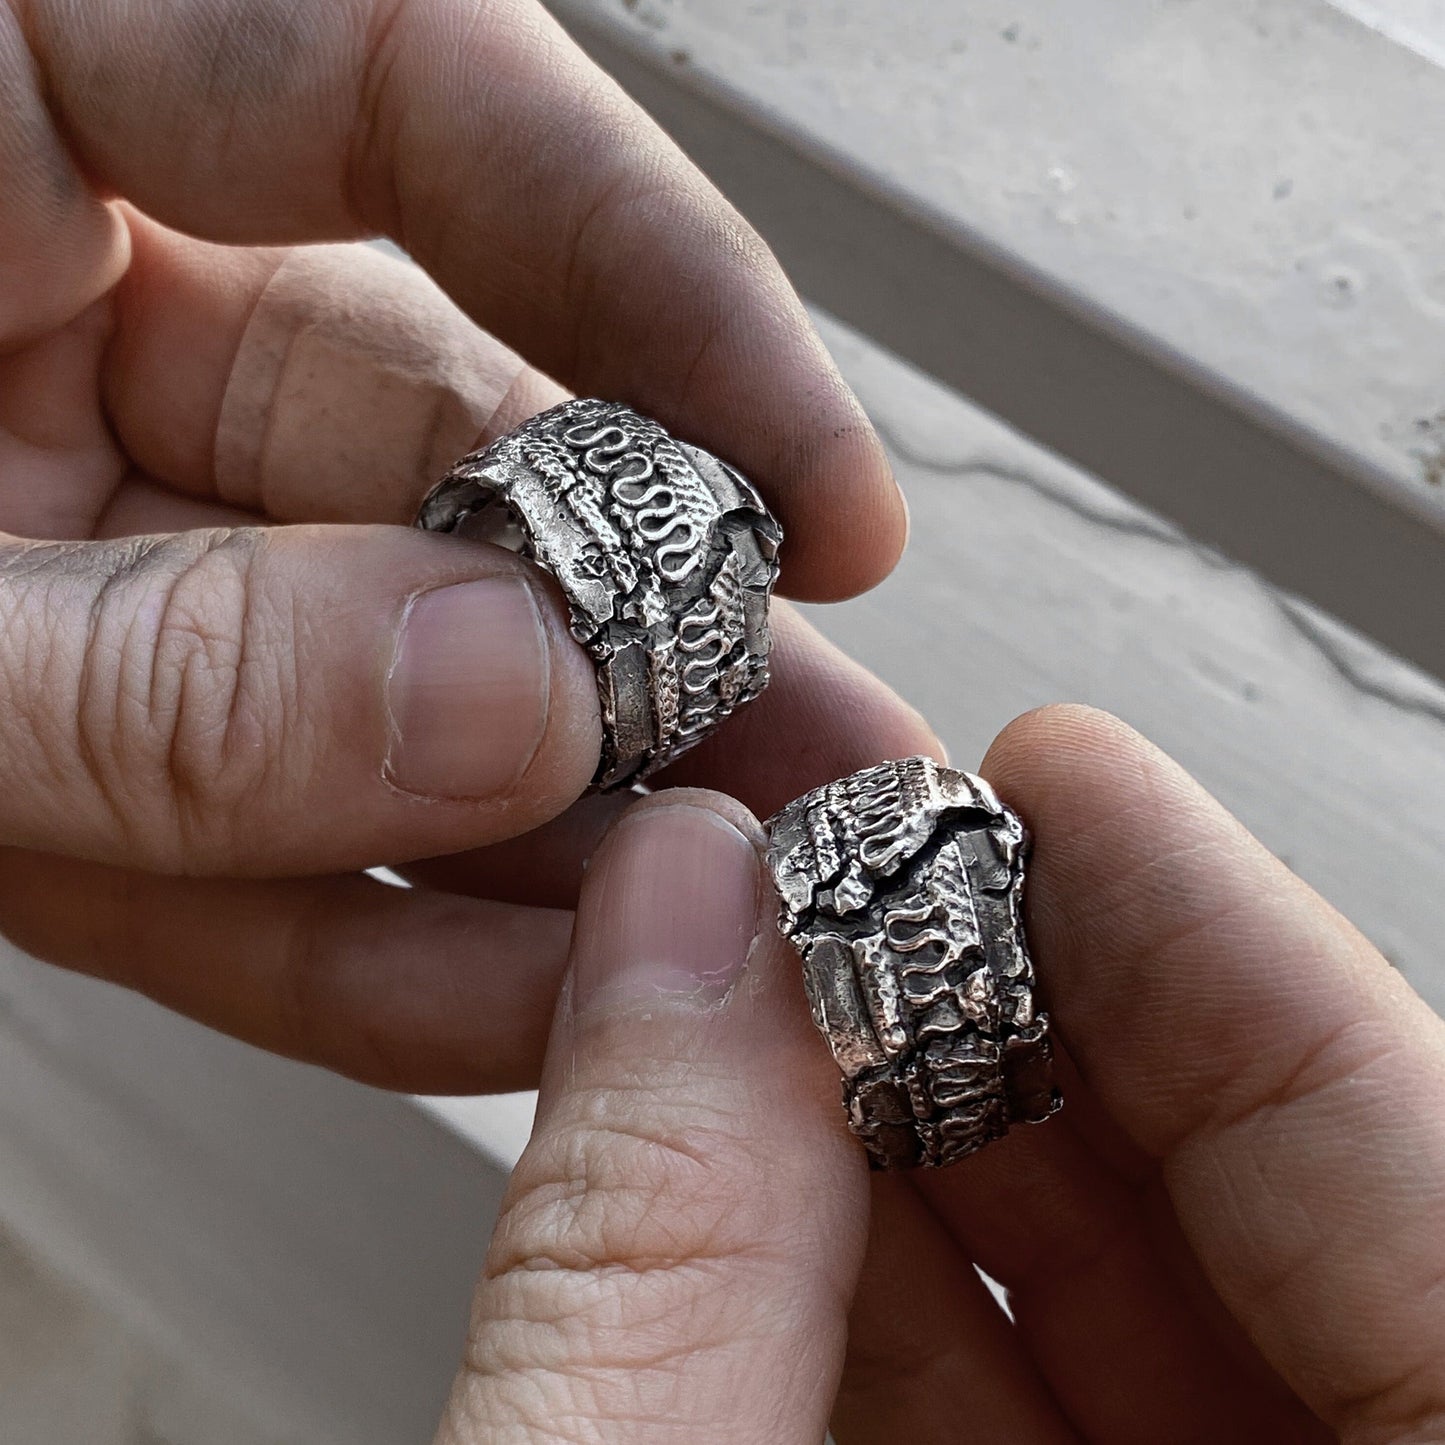 Old Istanbul ring - wide brutal ring with an oriental pattern and cracks Unusual rings Project50g 